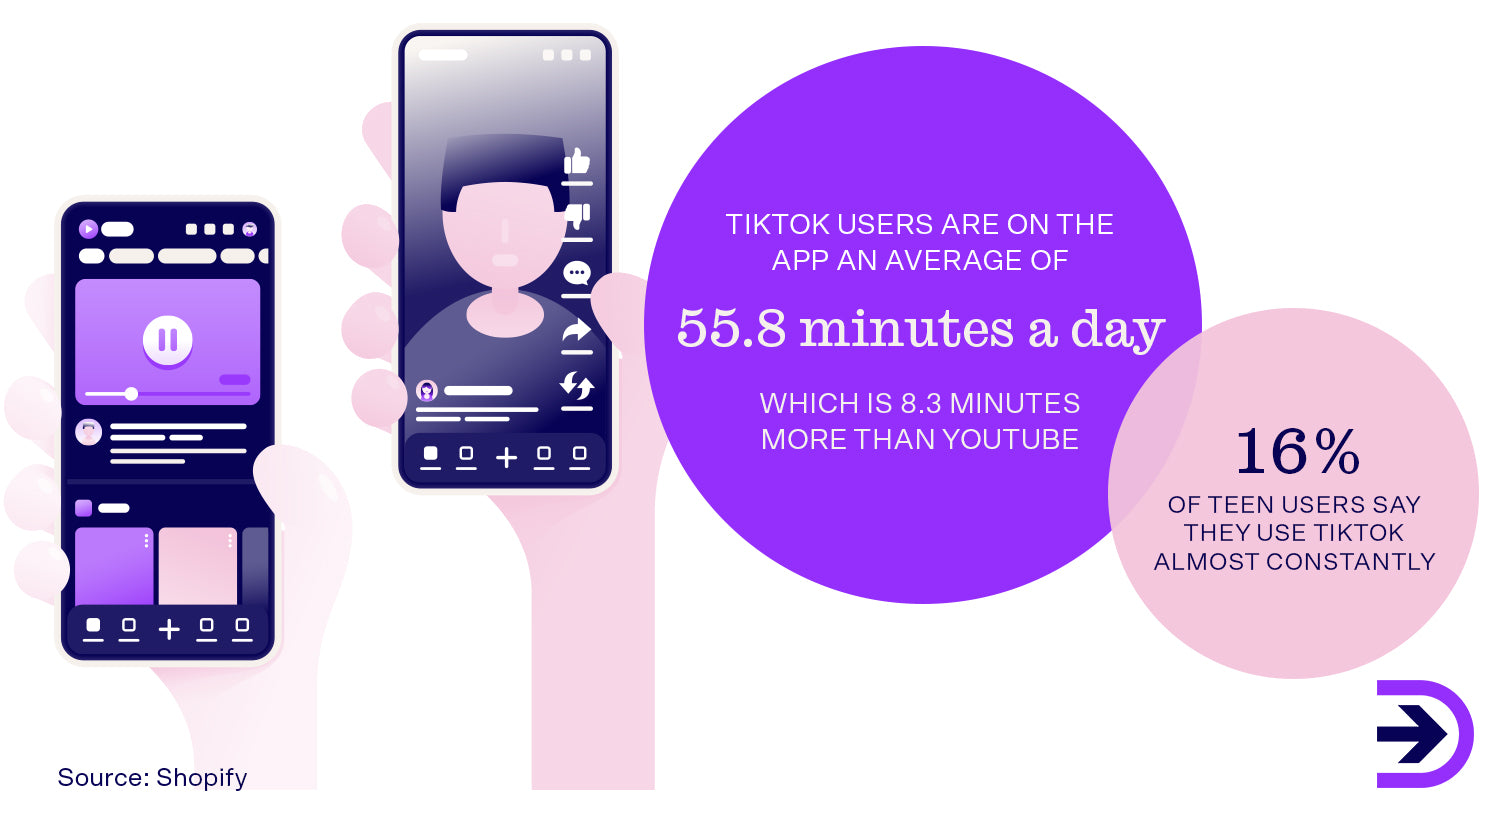 TikTok users are on the app an average of 55.8 minutes a day, suggesting users are more immersed in the platform.